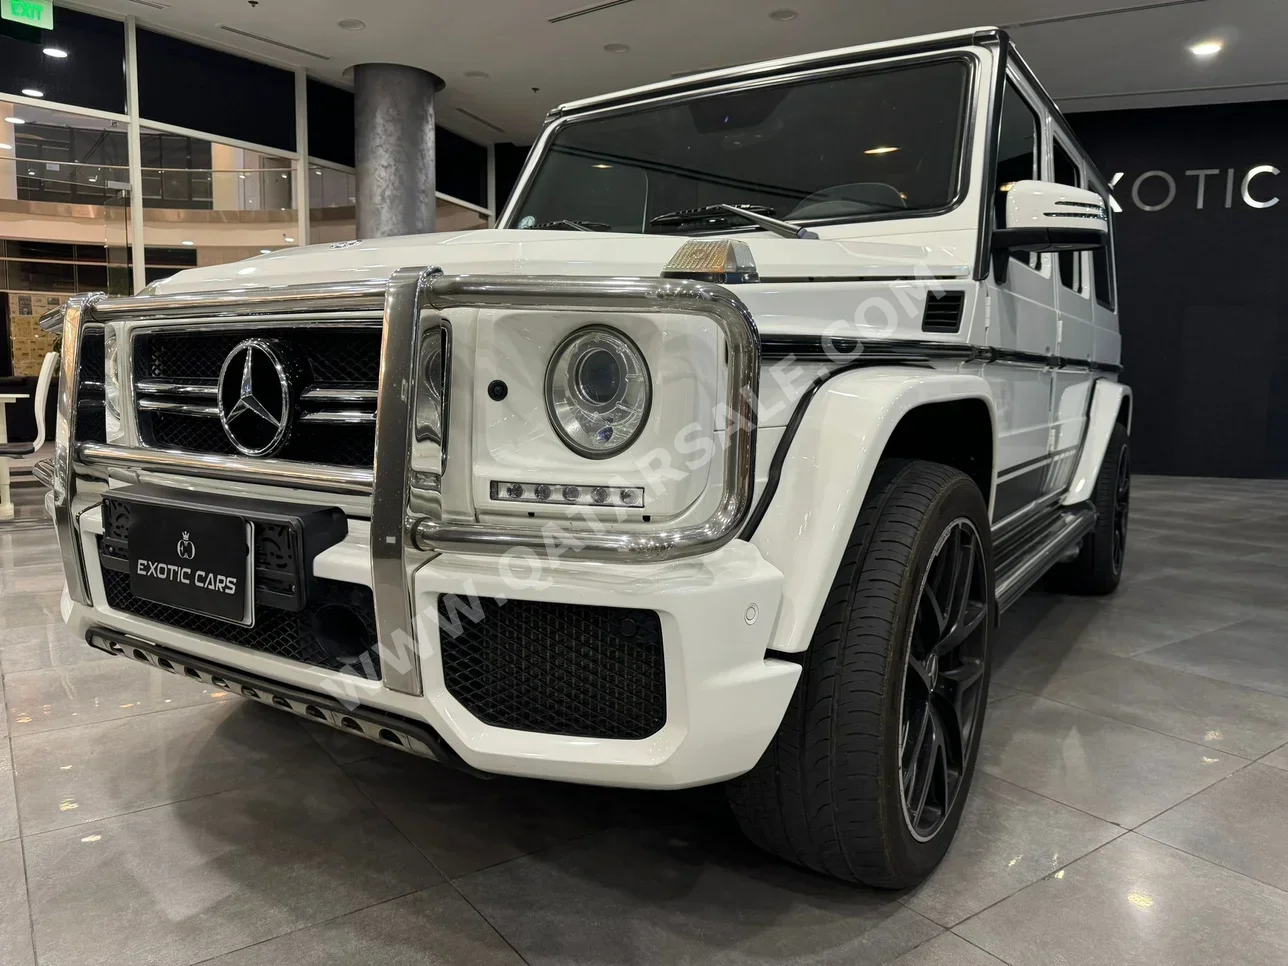 Mercedes-Benz  G-Class  63 AMG  2016  Automatic  120,000 Km  8 Cylinder  Four Wheel Drive (4WD)  SUV  White